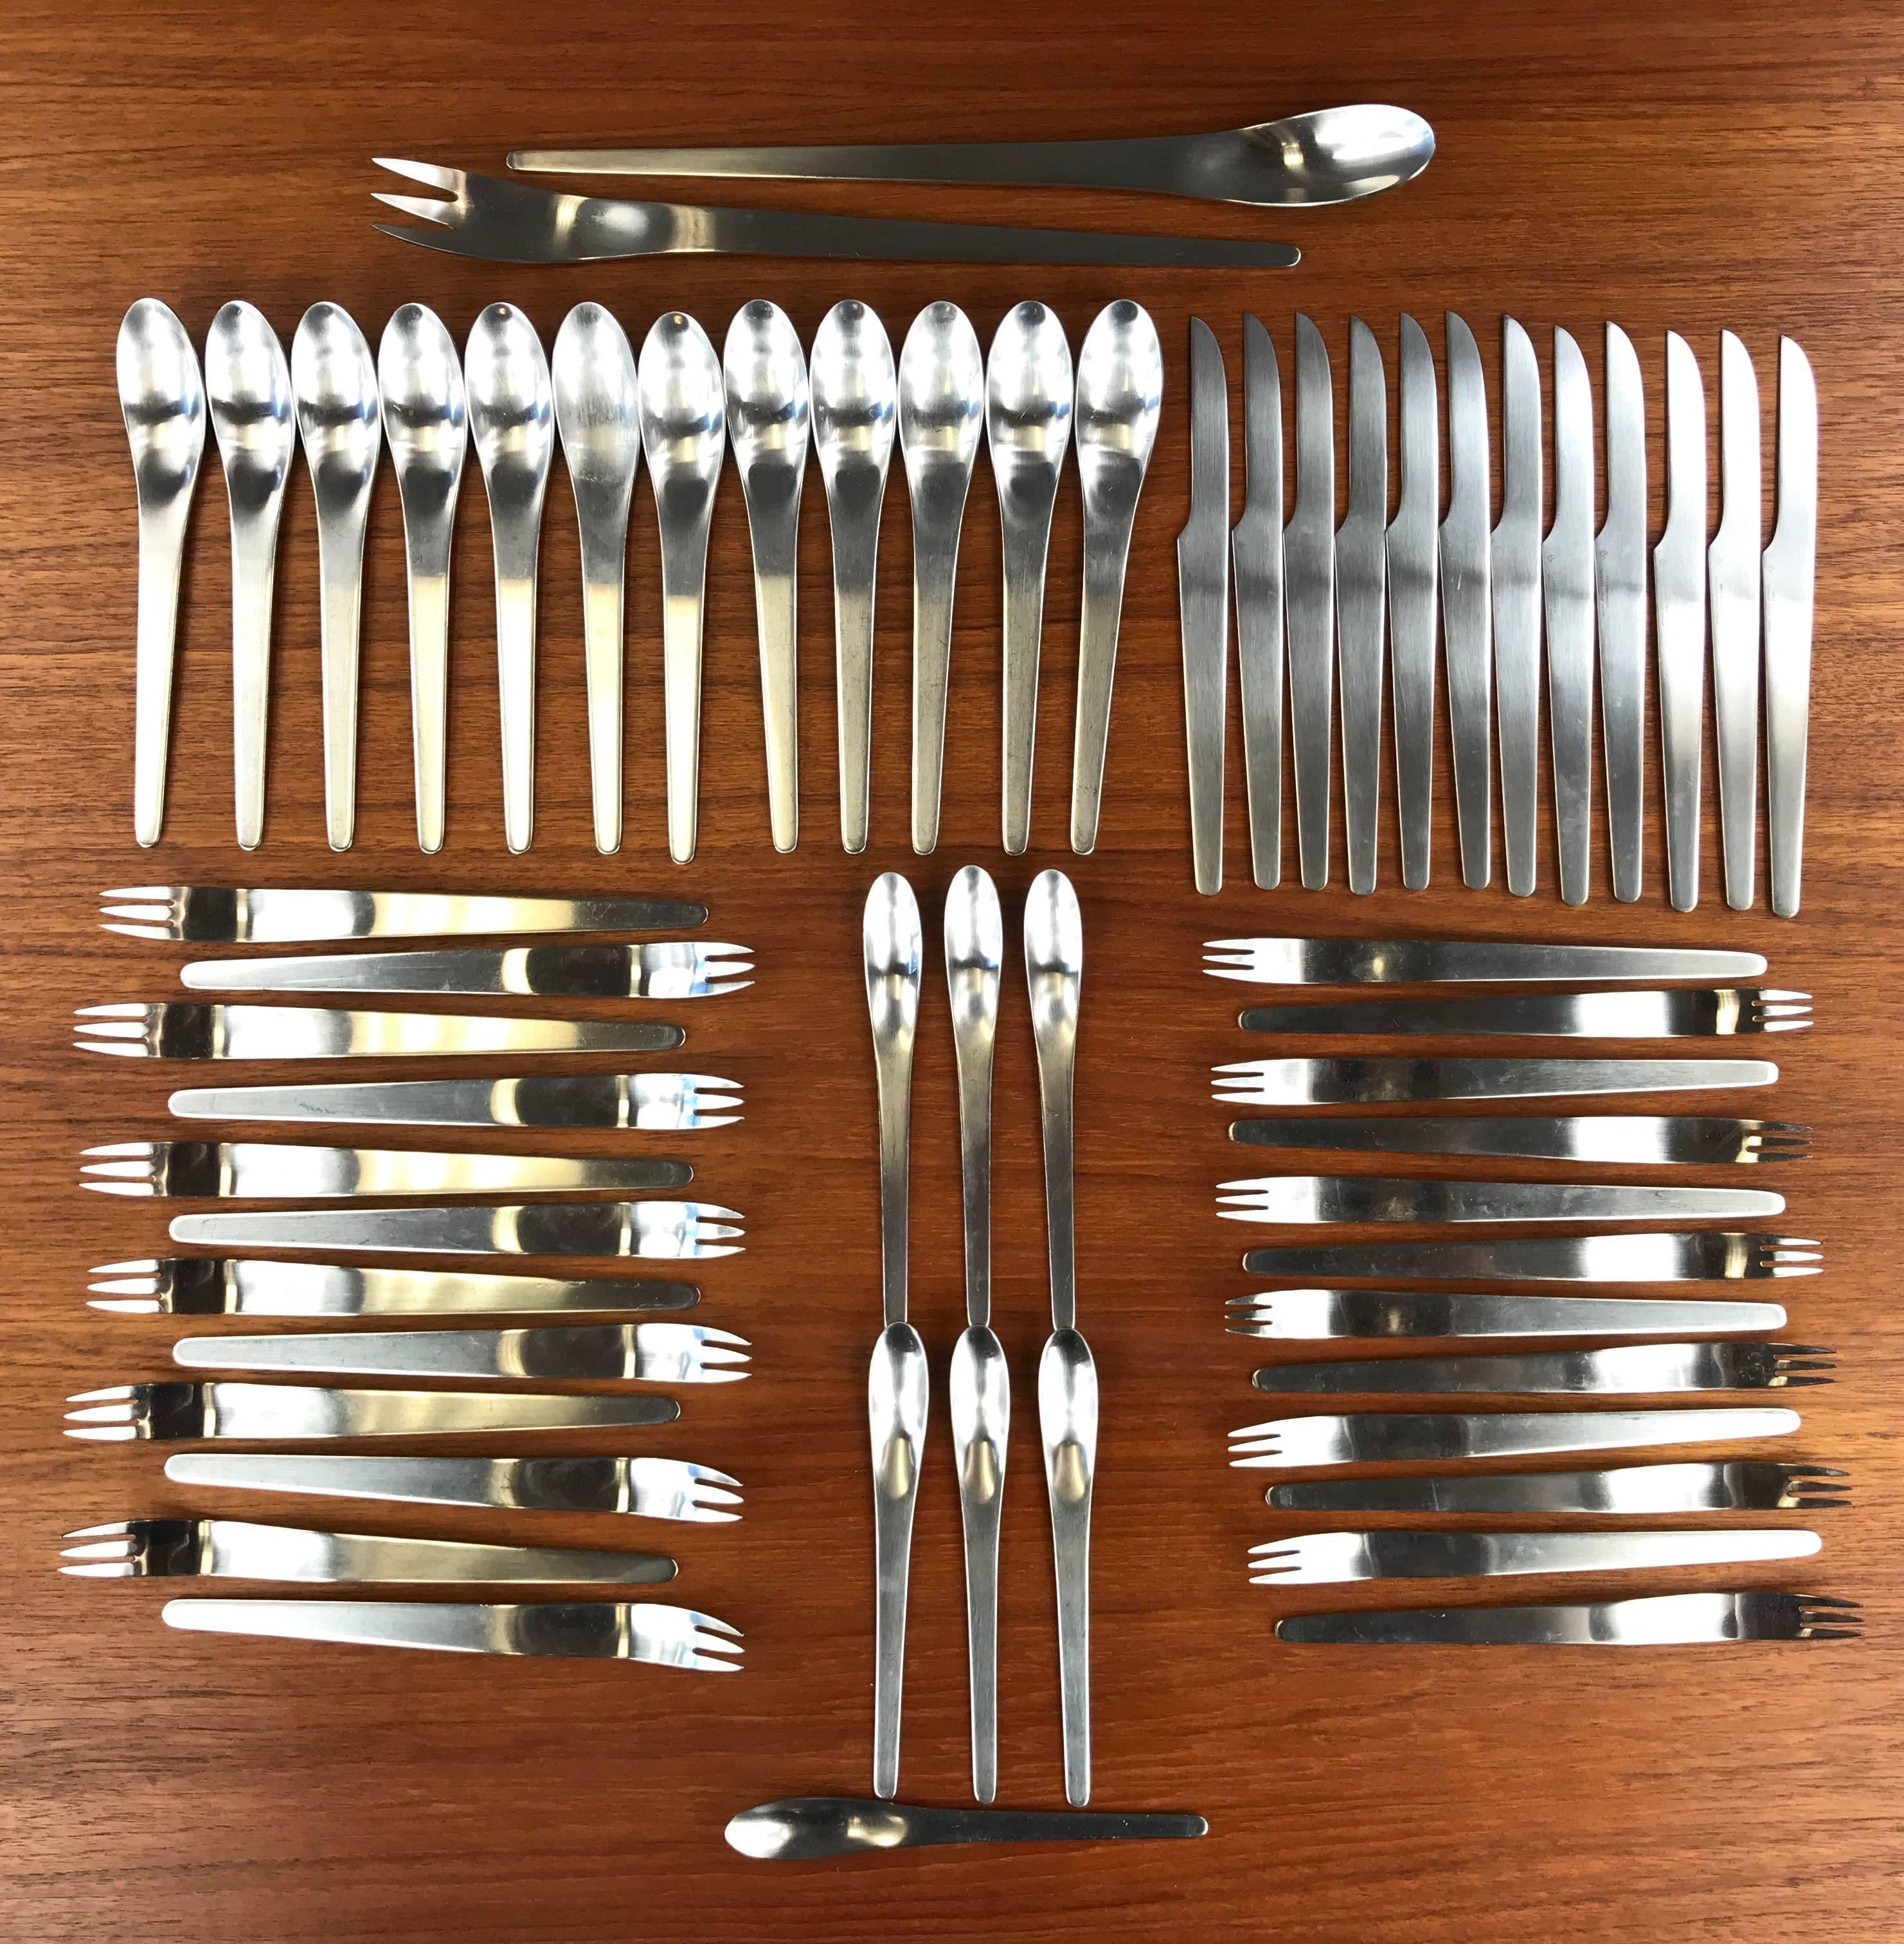 A vintage “AJ” 57-piece stainless steel flatware service for twelve by Arne Jacobsen for Georg Jensen.

Designed in 1957 by Arne Jacobsen for Georg Jensen, this iconic pattern’s futuristic minimalism is considered by many to represent the ideal